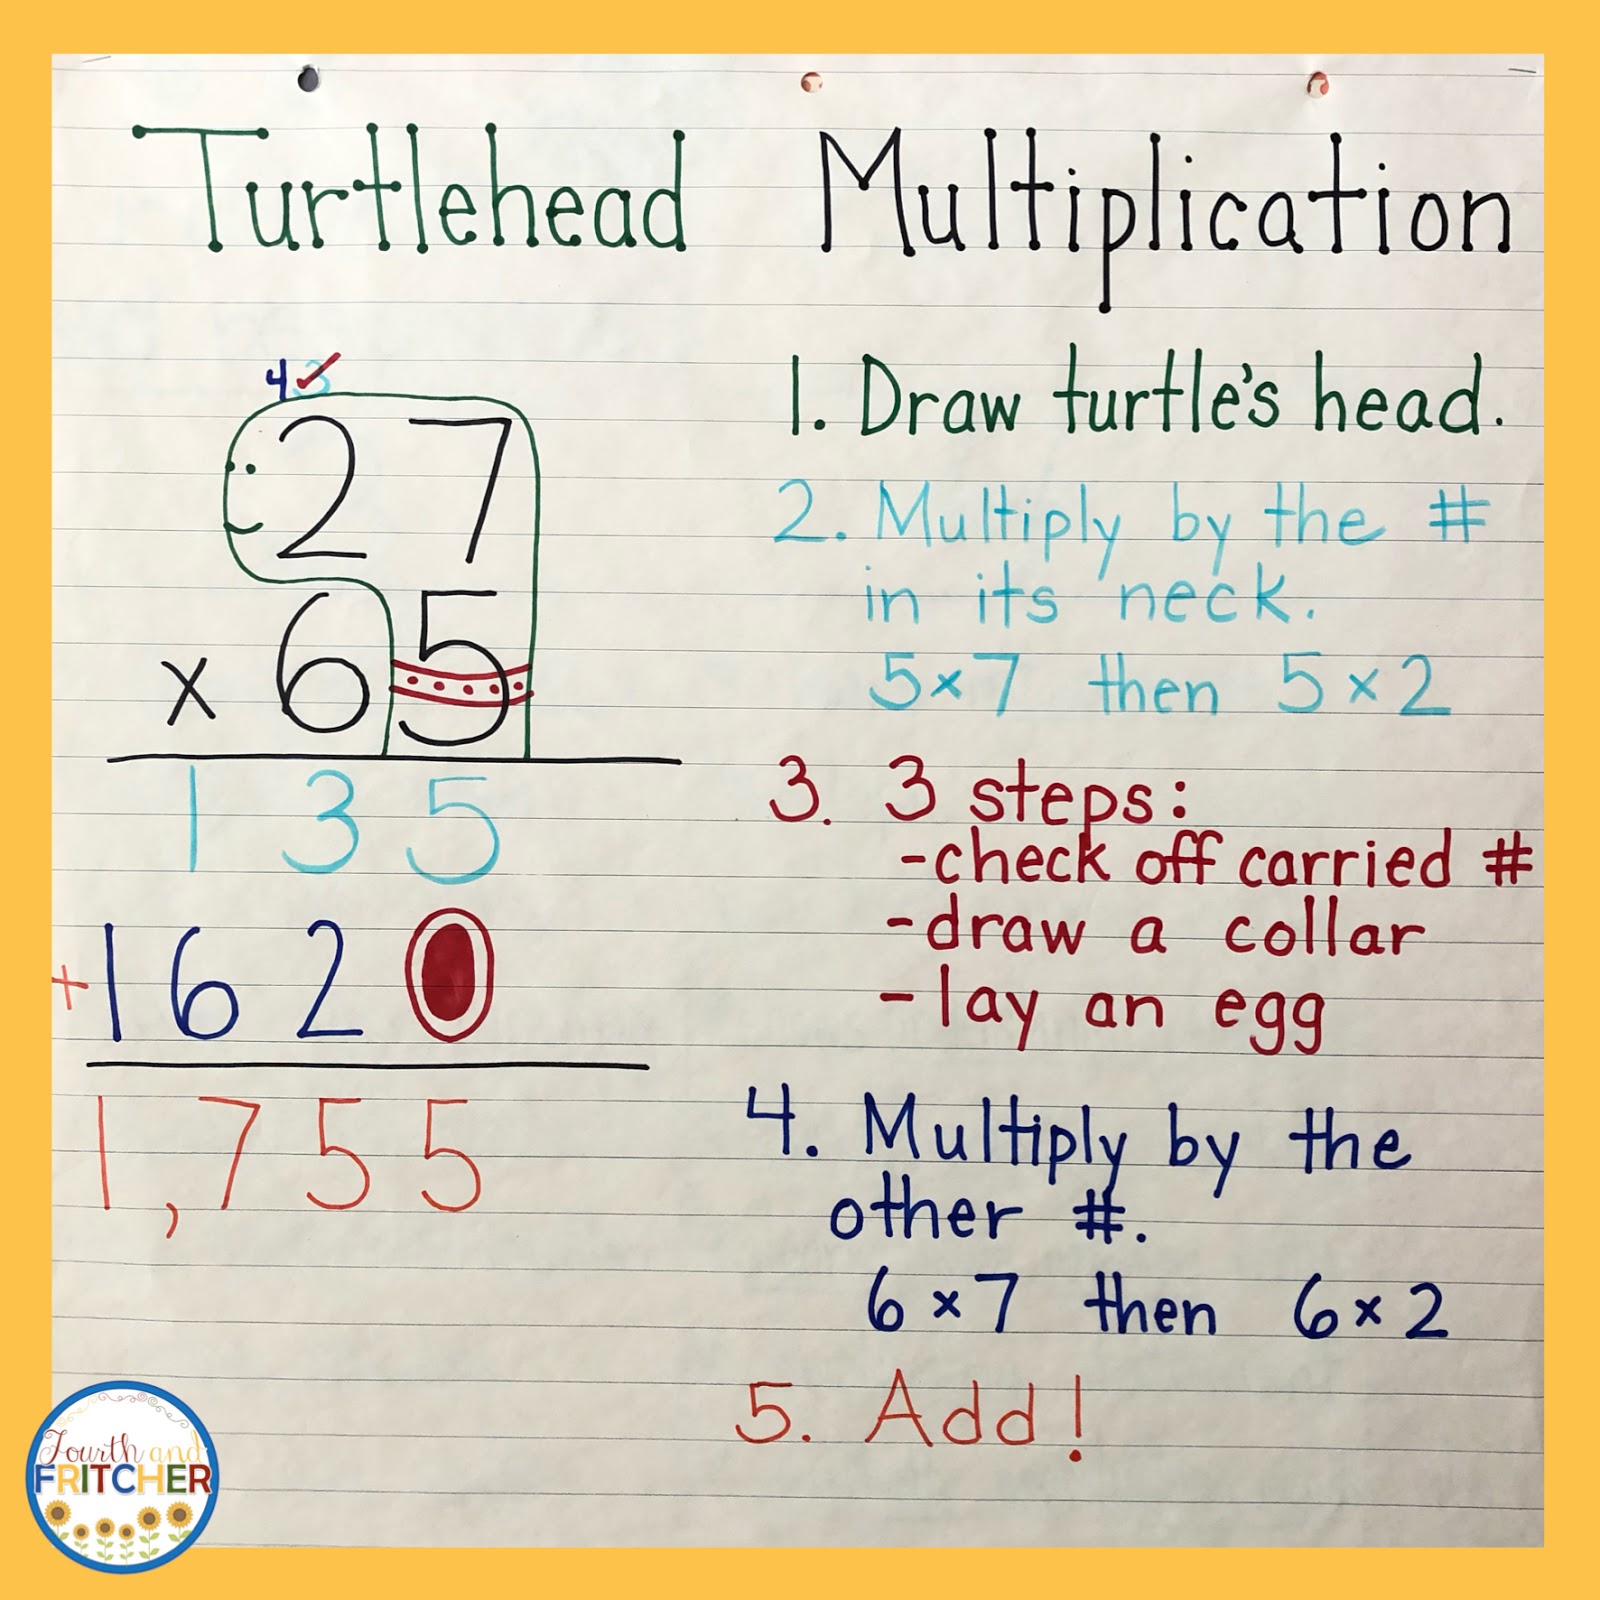 Fourth and Fritcher: Double-Digit Multiplication Strategies